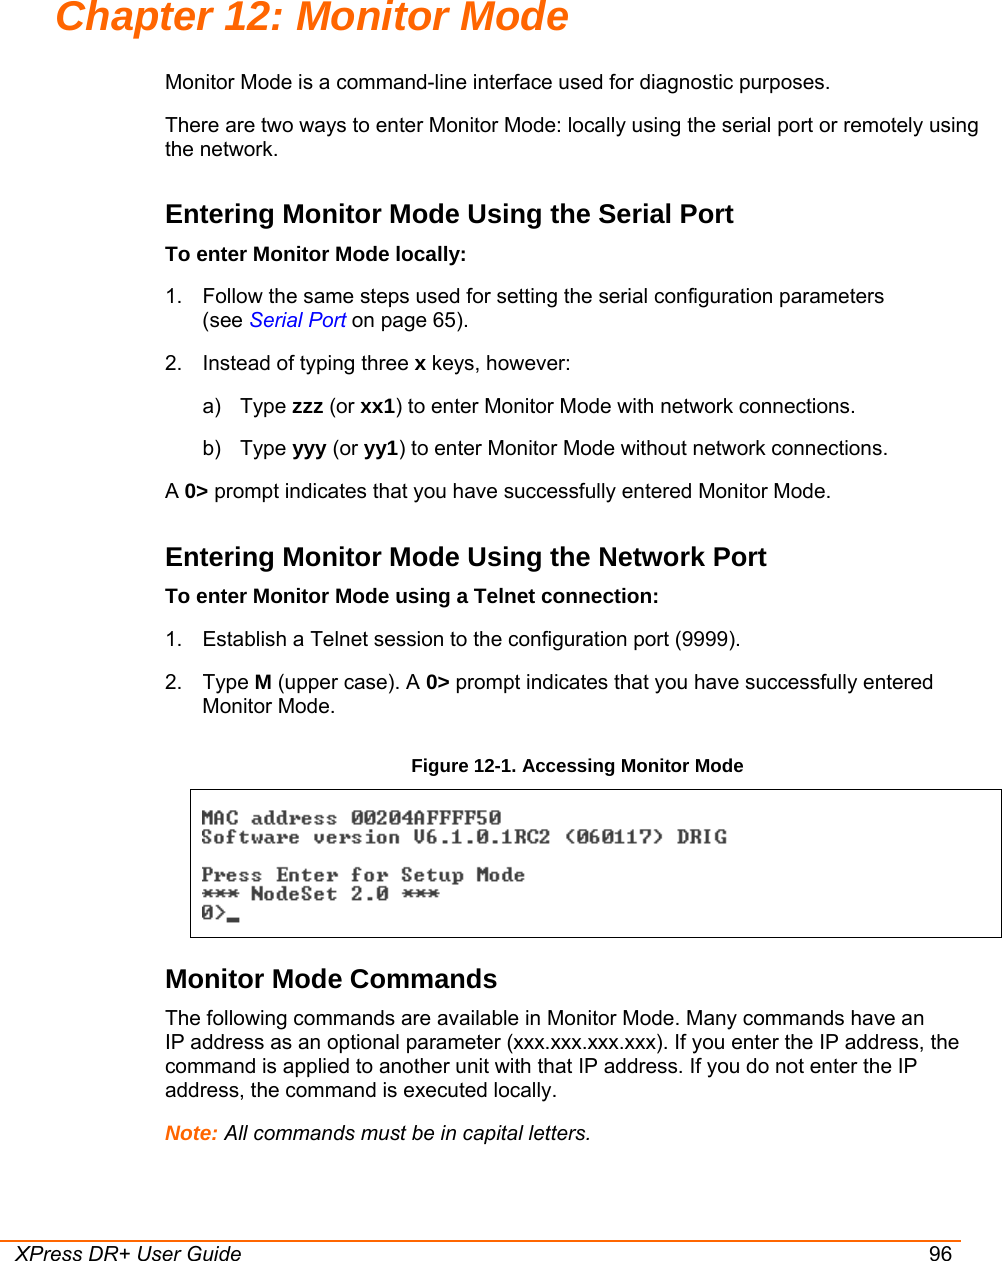  XPress DR+ User Guide 96 Chapter 12: Monitor Mode Monitor Mode is a command-line interface used for diagnostic purposes. There are two ways to enter Monitor Mode: locally using the serial port or remotely using the network.  Entering Monitor Mode Using the Serial Port To enter Monitor Mode locally: 1.  Follow the same steps used for setting the serial configuration parameters  (see Serial Port on page 65). 2.  Instead of typing three x keys, however: a) Type zzz (or xx1) to enter Monitor Mode with network connections. b) Type yyy (or yy1) to enter Monitor Mode without network connections. A 0&gt; prompt indicates that you have successfully entered Monitor Mode. Entering Monitor Mode Using the Network Port To enter Monitor Mode using a Telnet connection: 1.  Establish a Telnet session to the configuration port (9999). 2. Type M (upper case). A 0&gt; prompt indicates that you have successfully entered Monitor Mode. Figure 12-1. Accessing Monitor Mode  Monitor Mode Commands The following commands are available in Monitor Mode. Many commands have an  IP address as an optional parameter (xxx.xxx.xxx.xxx). If you enter the IP address, the command is applied to another unit with that IP address. If you do not enter the IP address, the command is executed locally. Note: All commands must be in capital letters.  